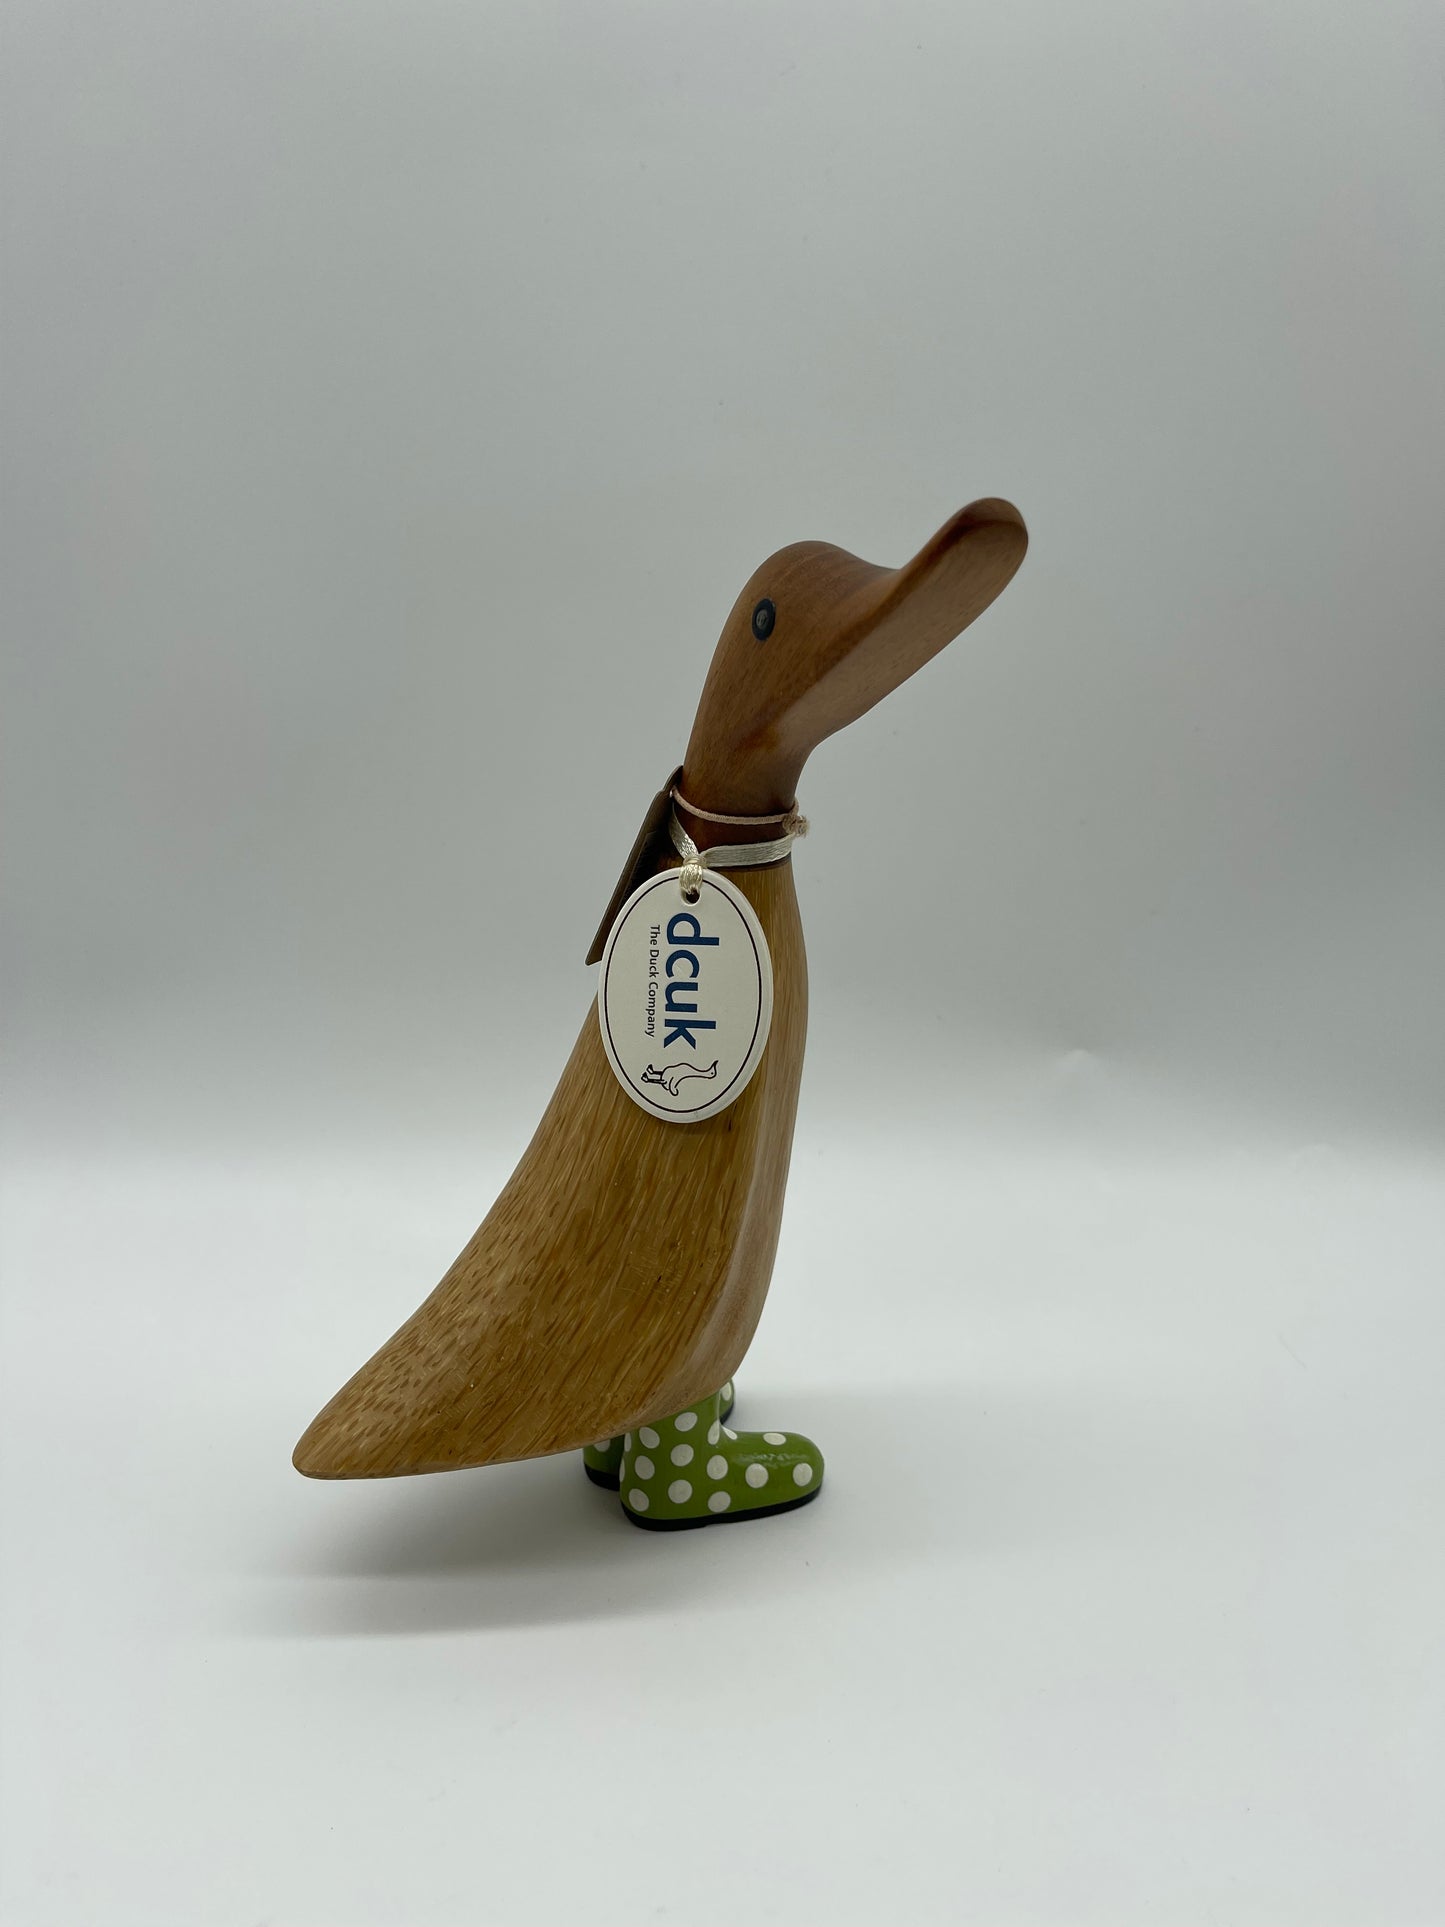 Duck Wooden With Spotty Coloured  Welly Boots 30cm